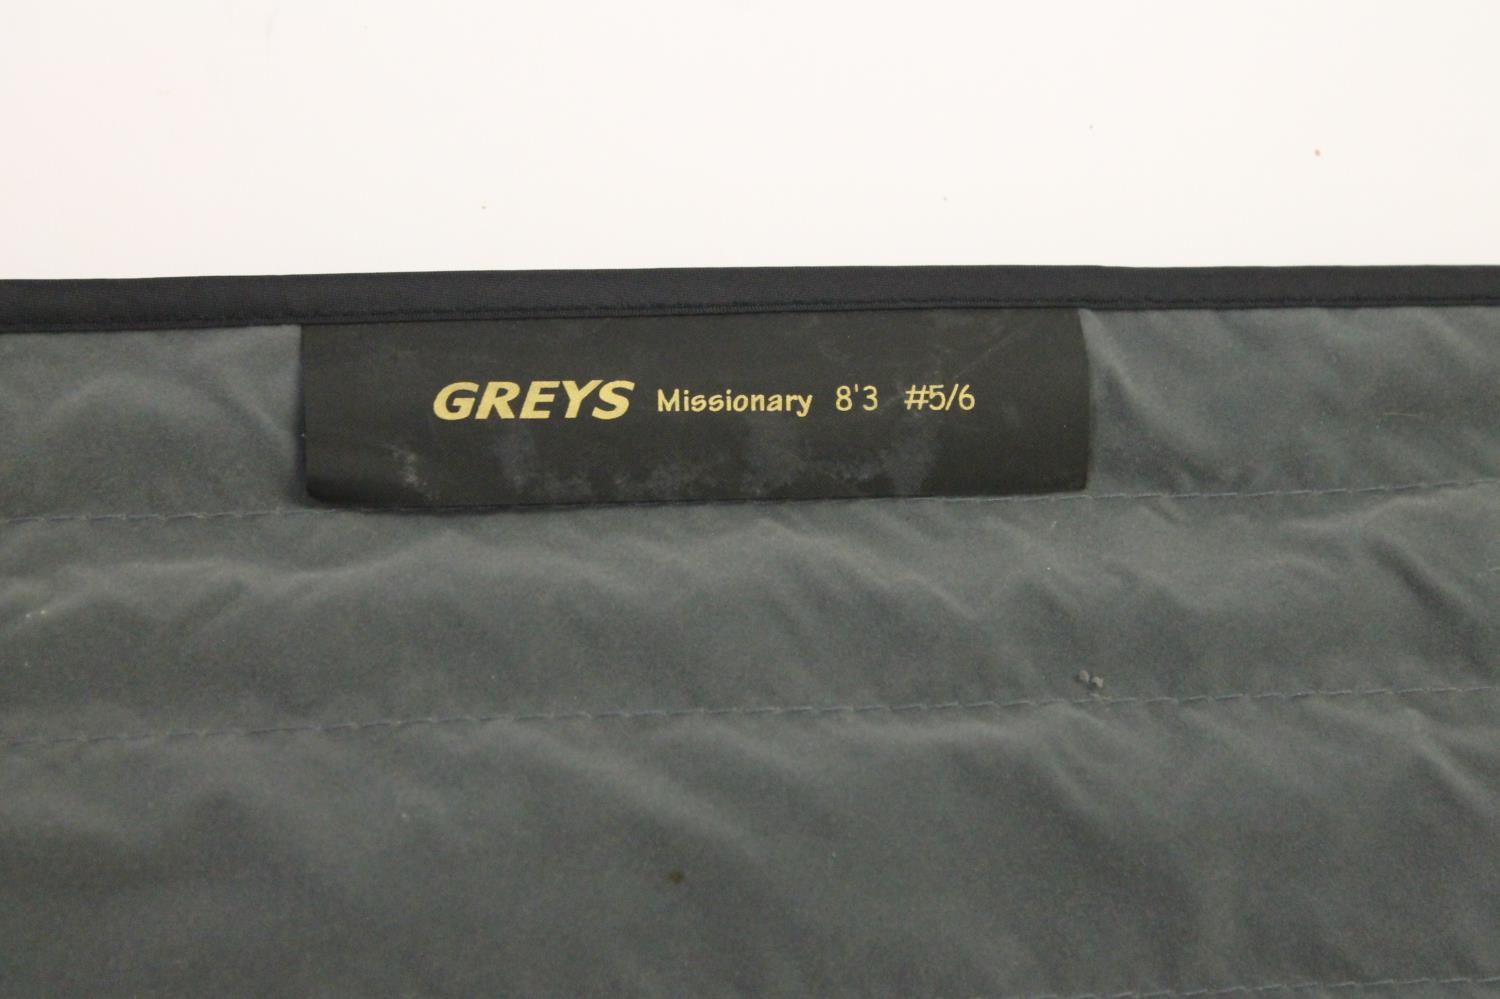 GREY'S MISSIONARY - CARBON FIBRE TRAVEL FISHING ROD. - Image 9 of 11